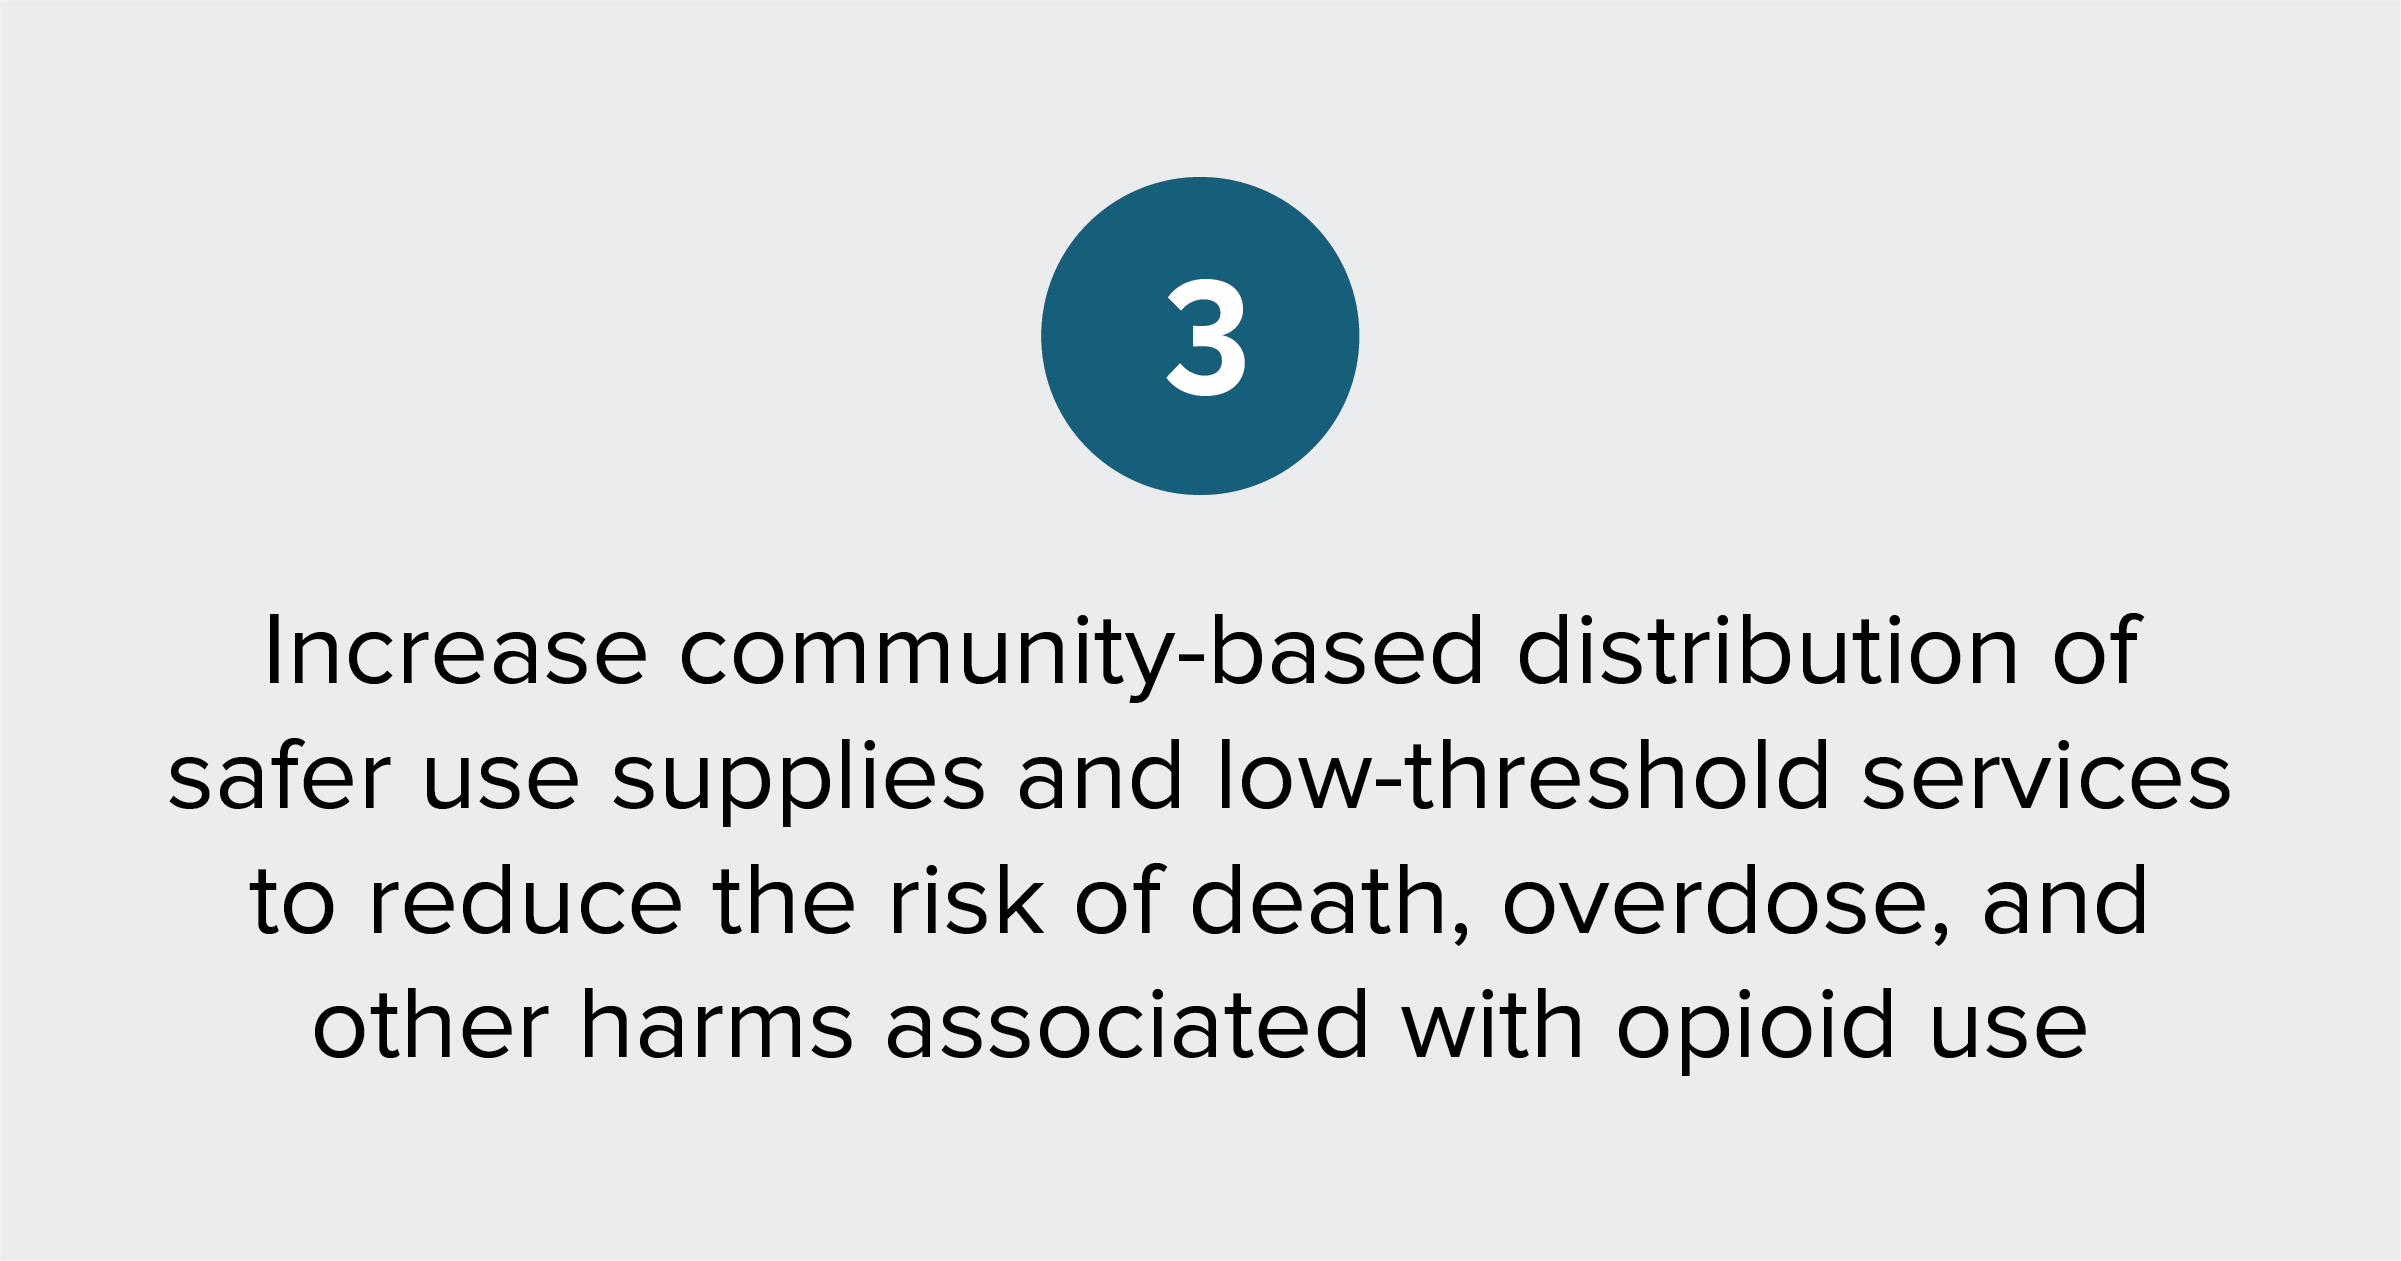 Text of report recommendation 3: Increase community-based distribution of safer use supplies and low-threshold care to reduce the risk of death, overdose, and other harms associated with opioid use